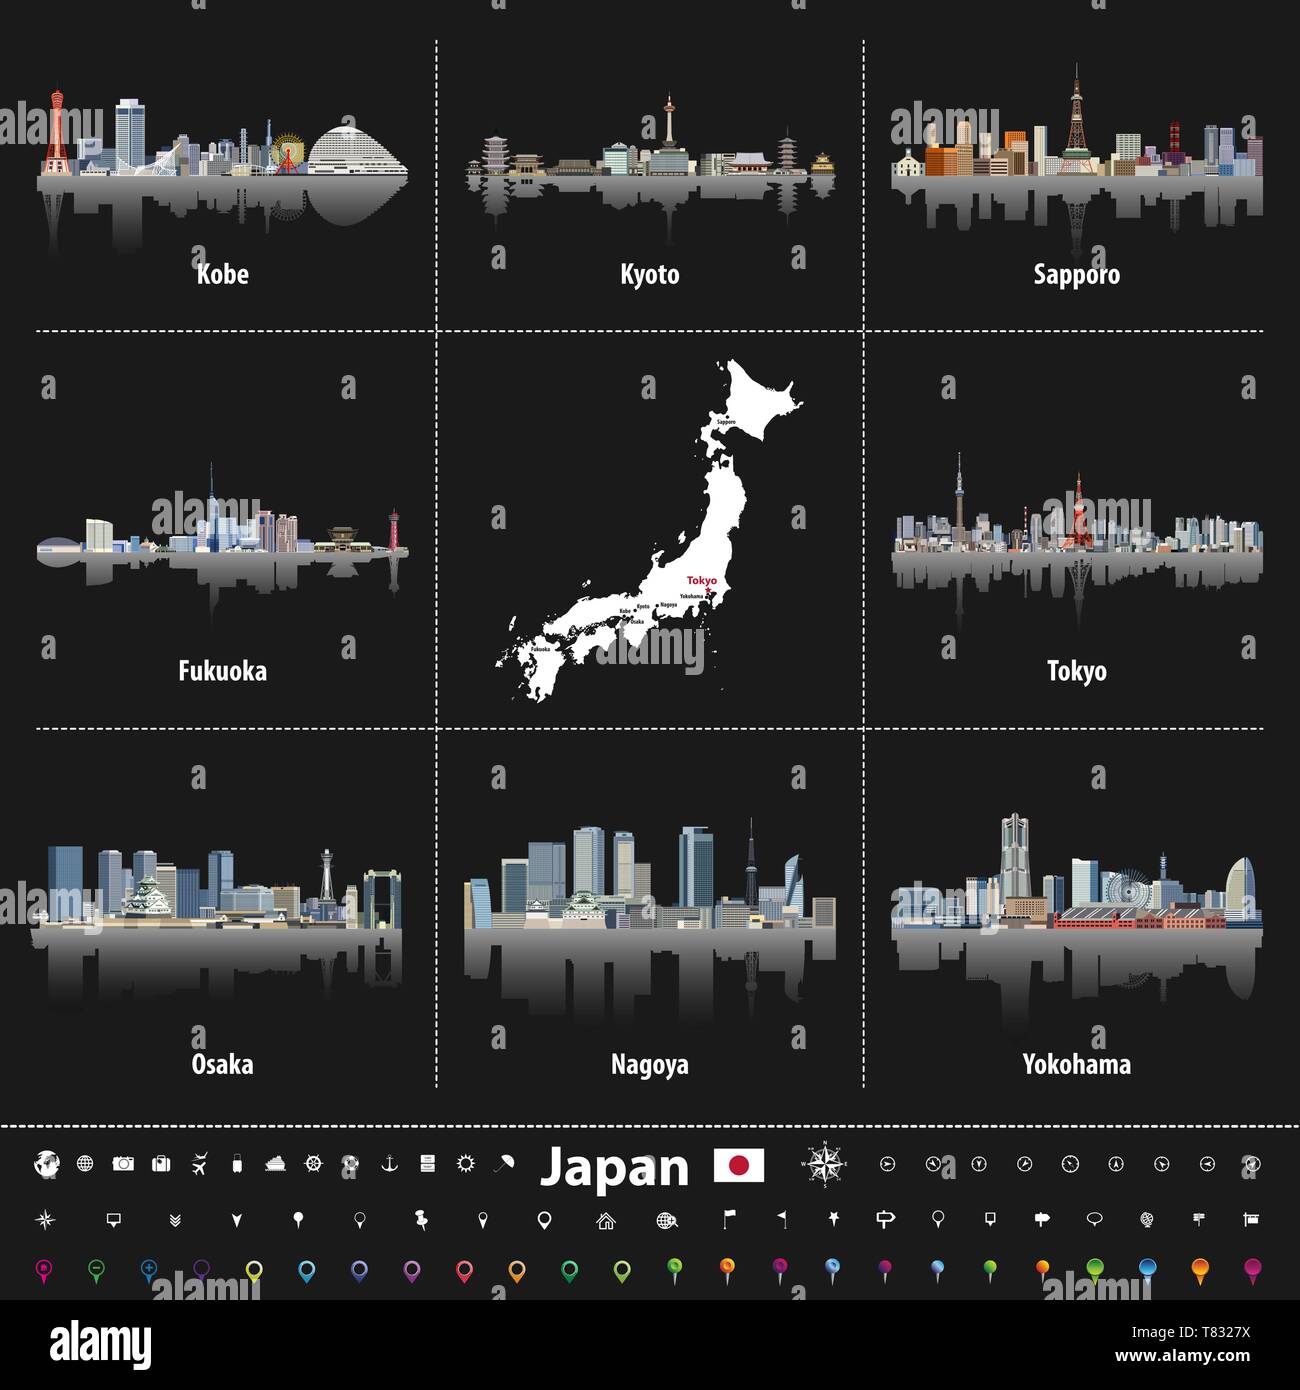 japanese map with largest Japan cities skylines Stock Vector